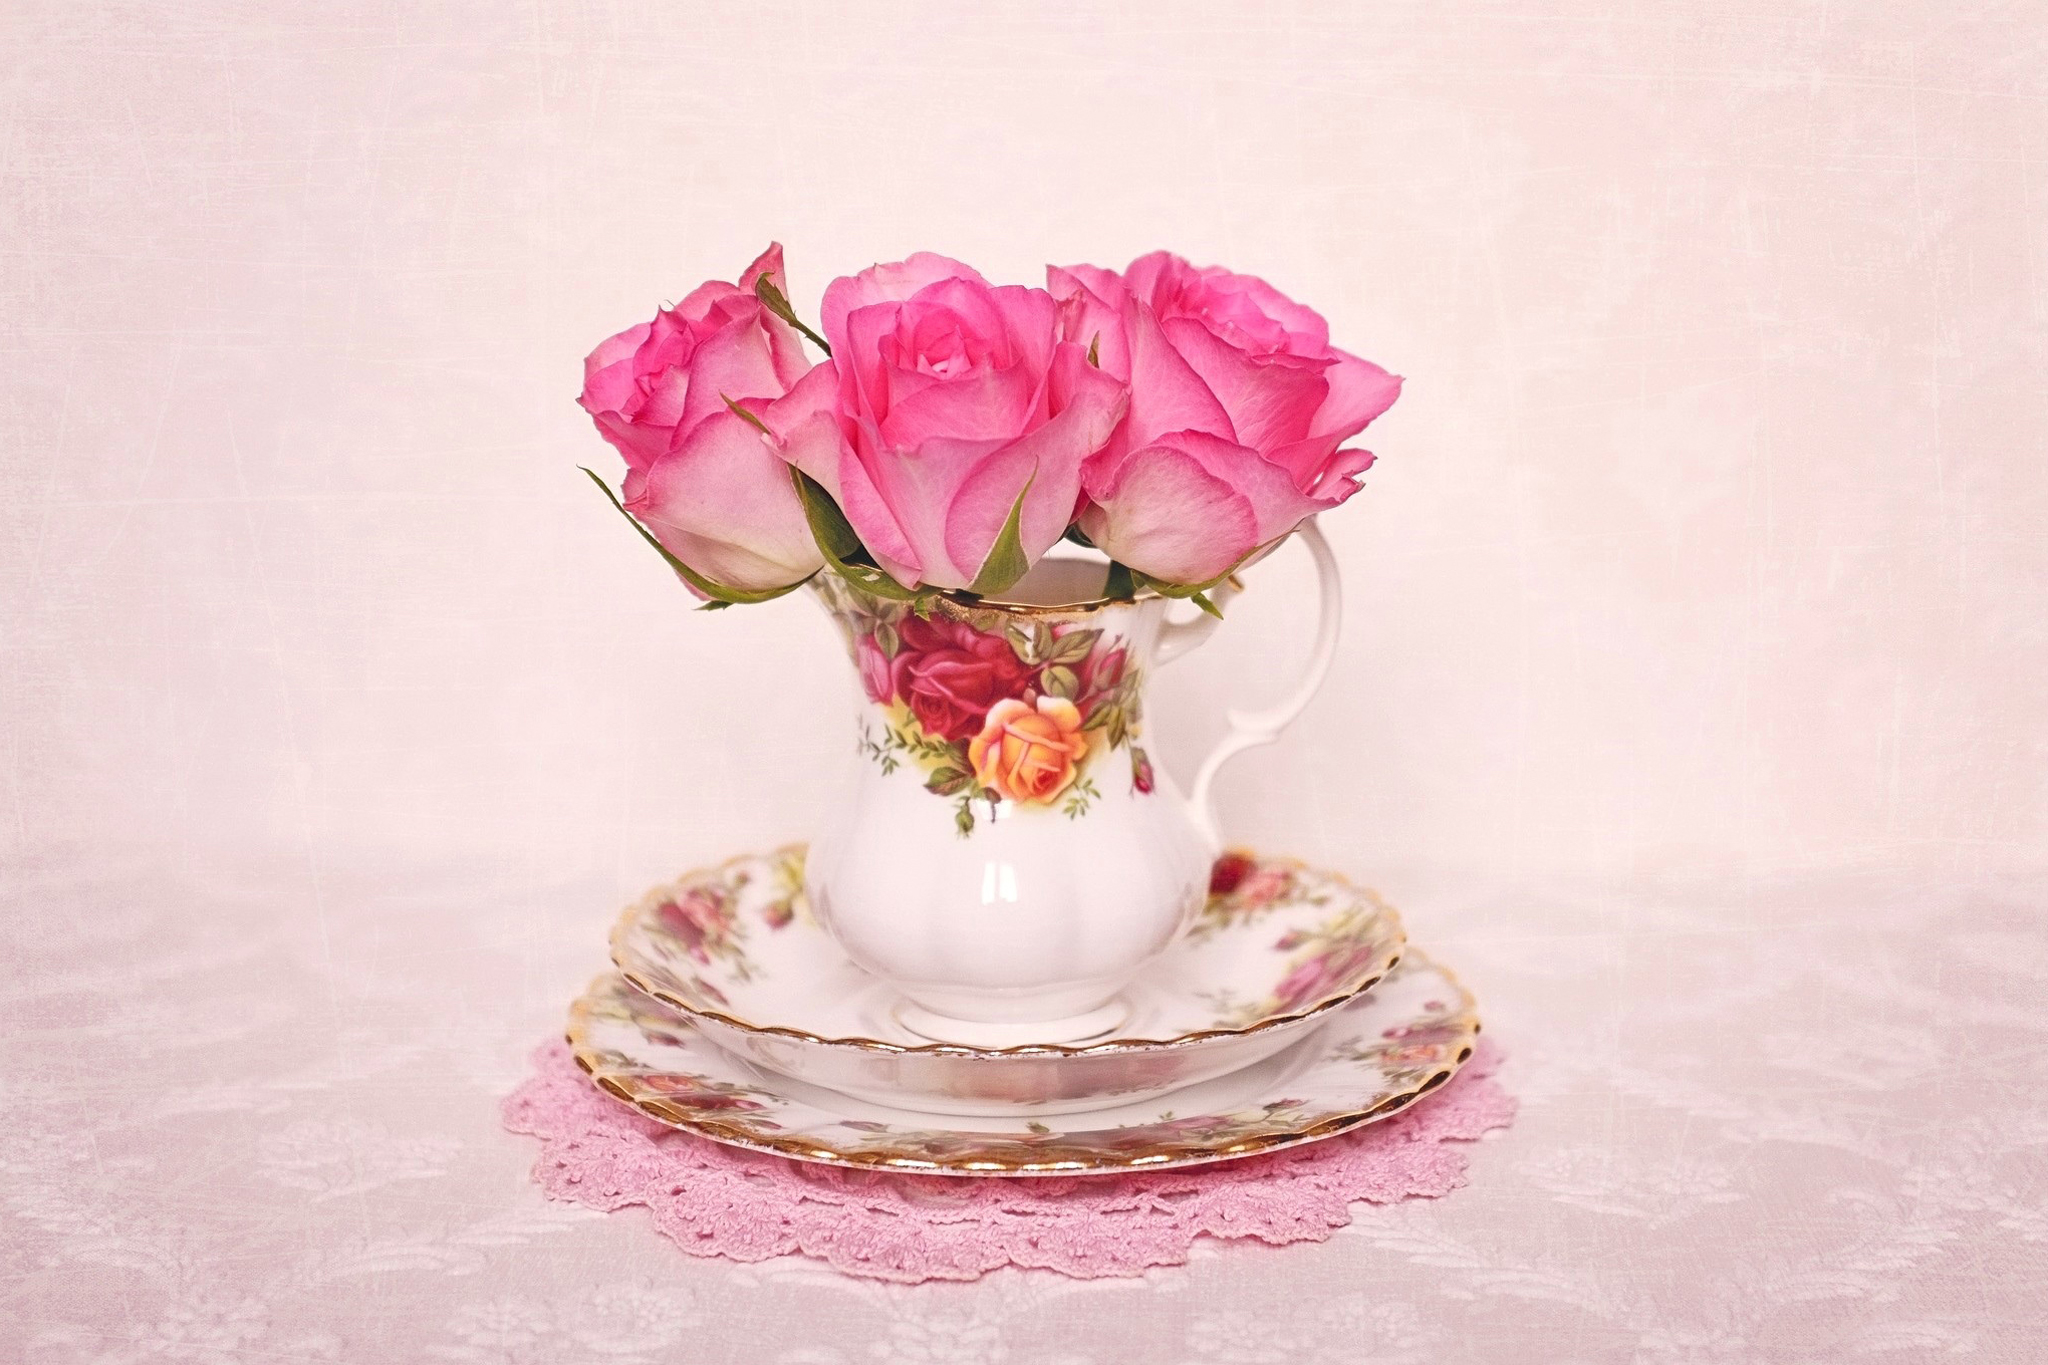 photography, still life, cup, pink flower, rose, saucer Full HD